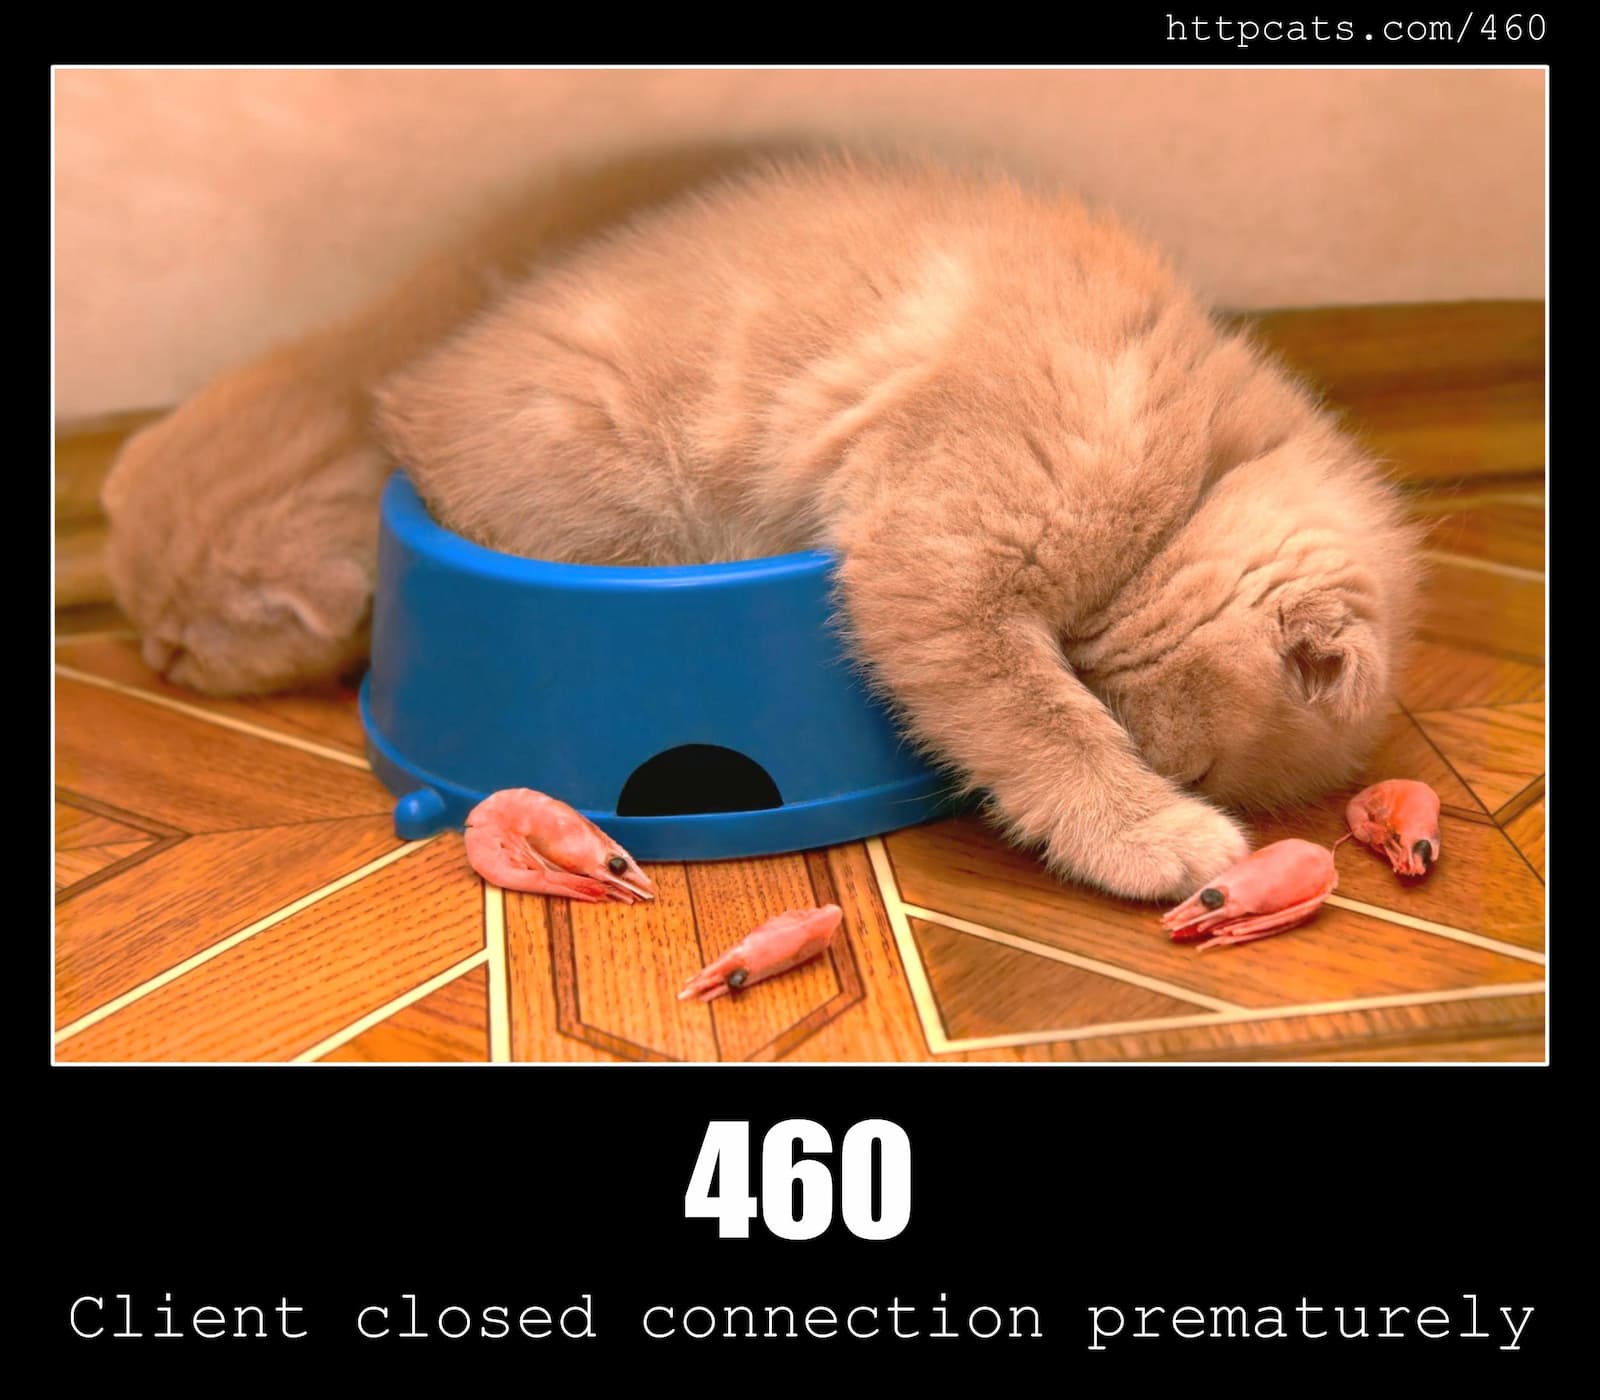 HTTP Status Code 460 Client closed connection prematurely & Cats